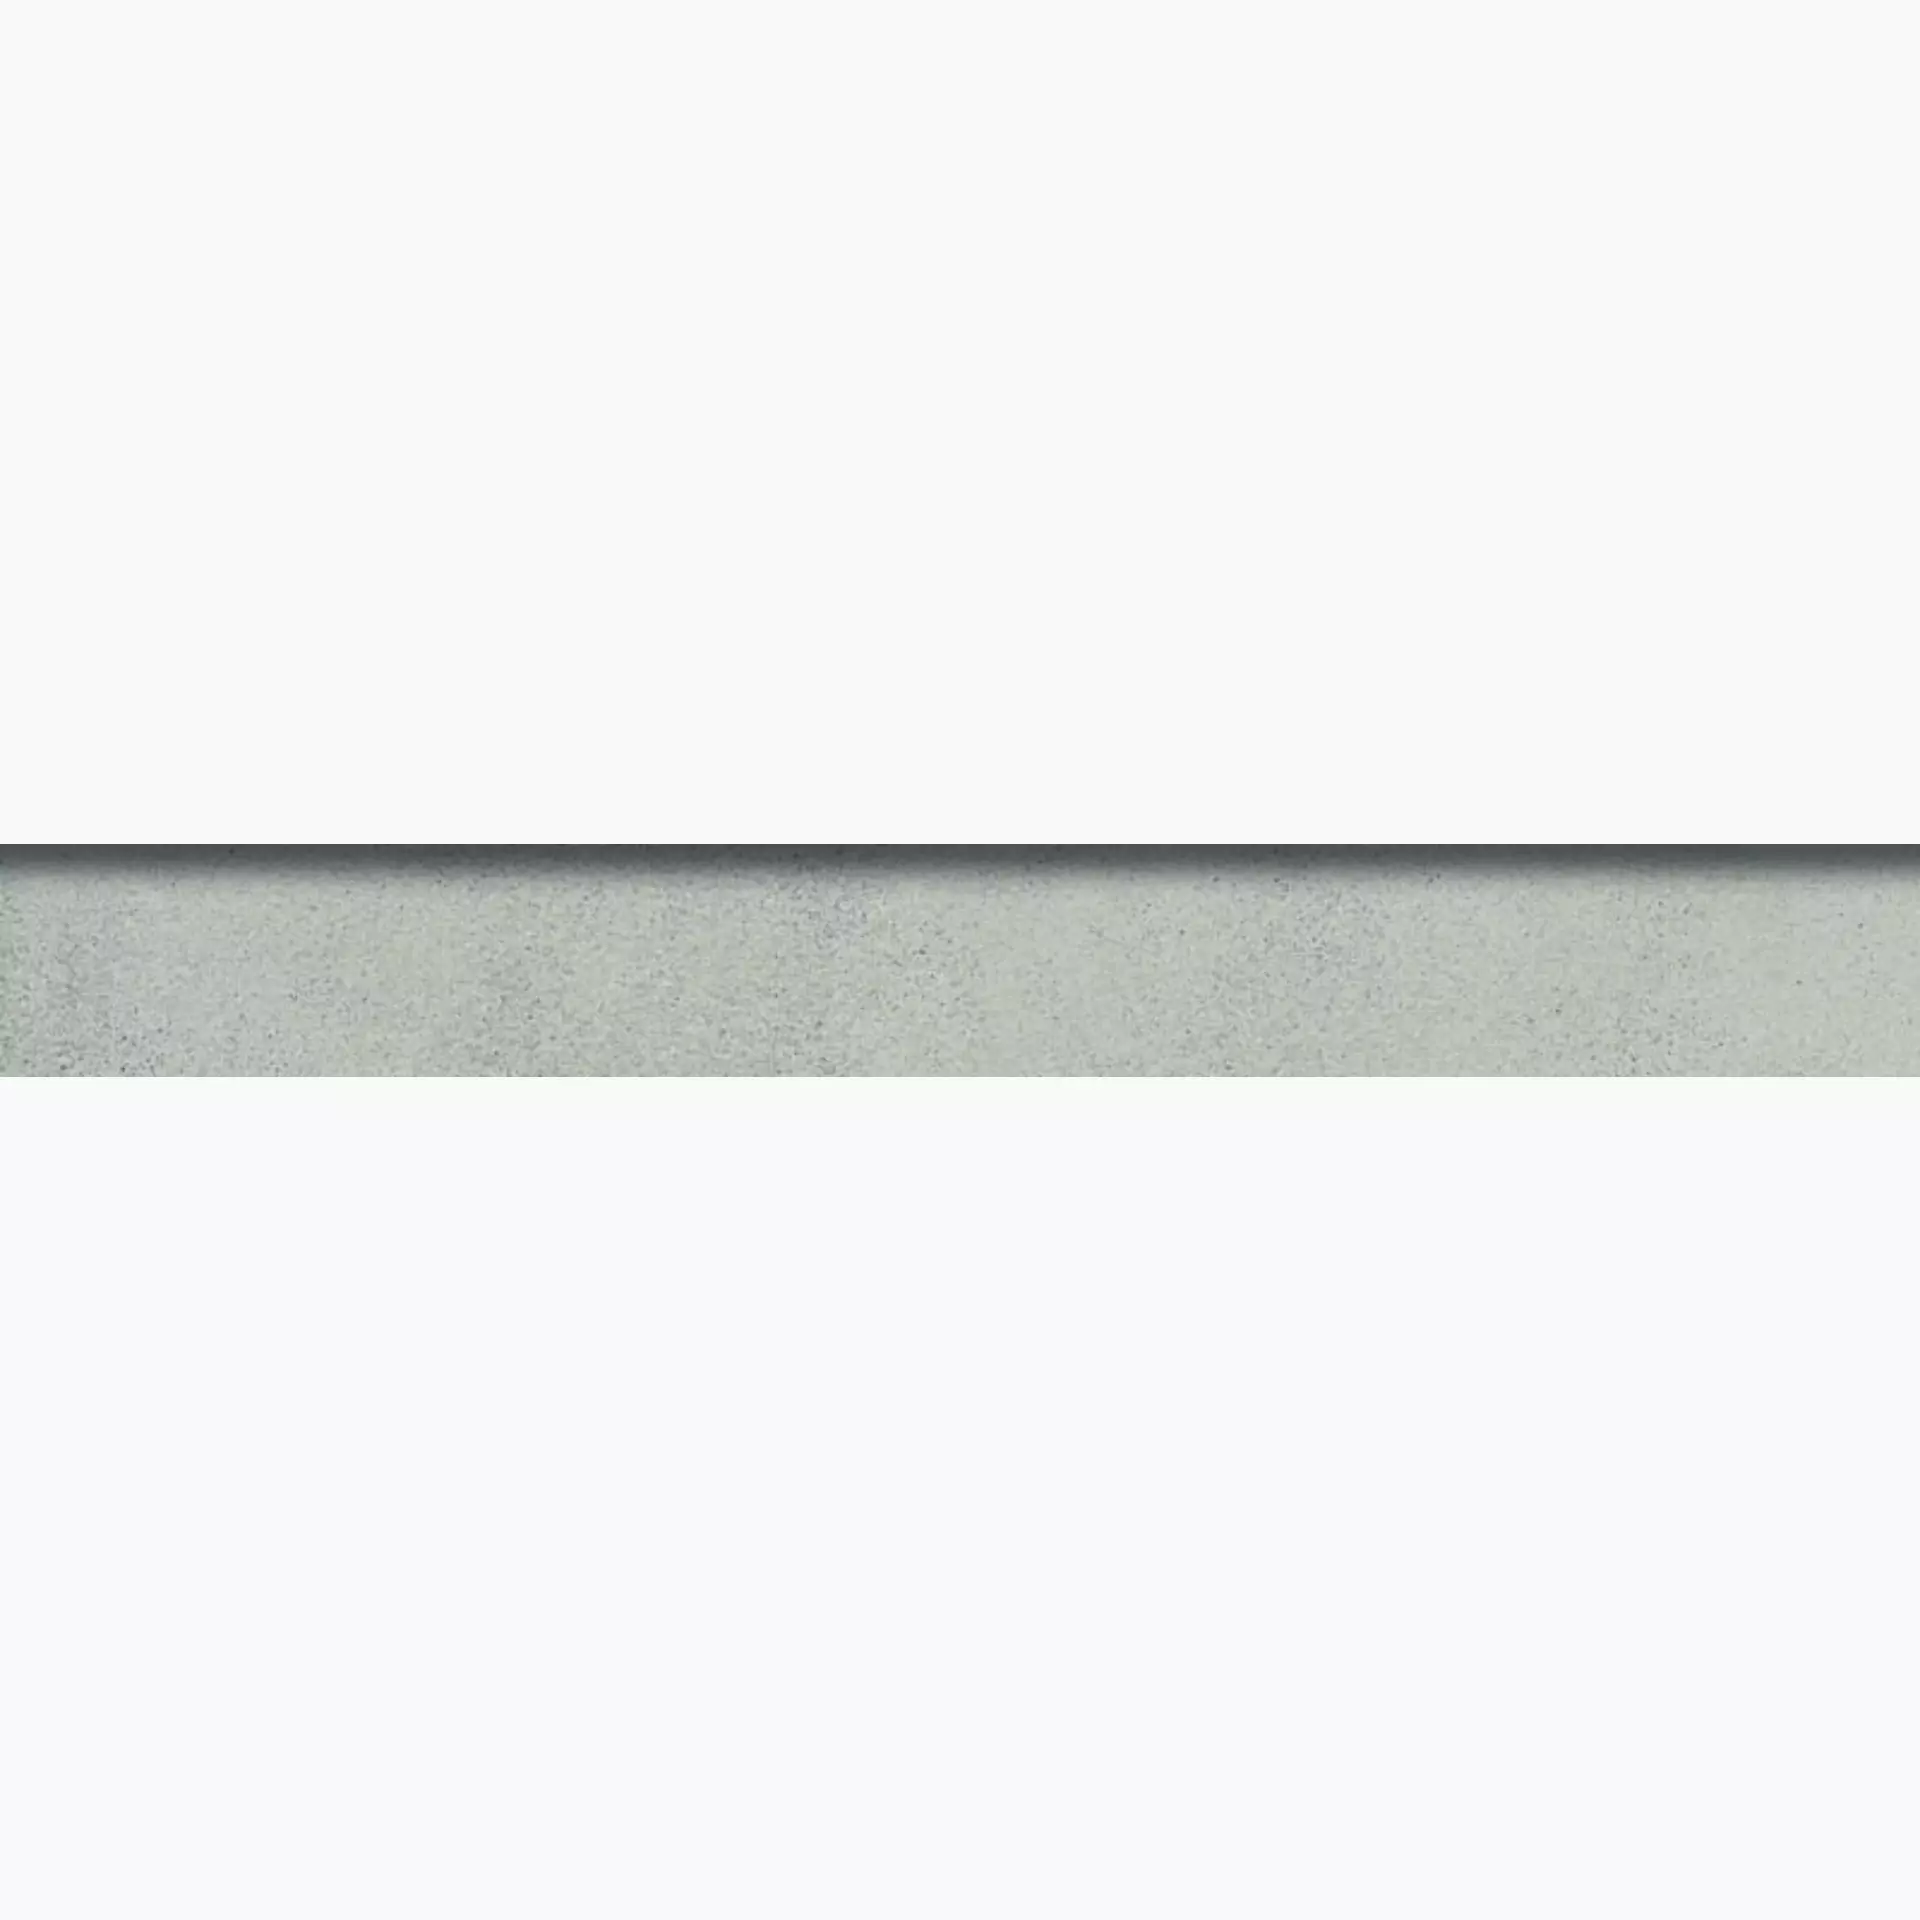 Sant Agostino Sable Pearl Natural Skirting board CSABSAPE60 7,3x60cm rectified 10mm